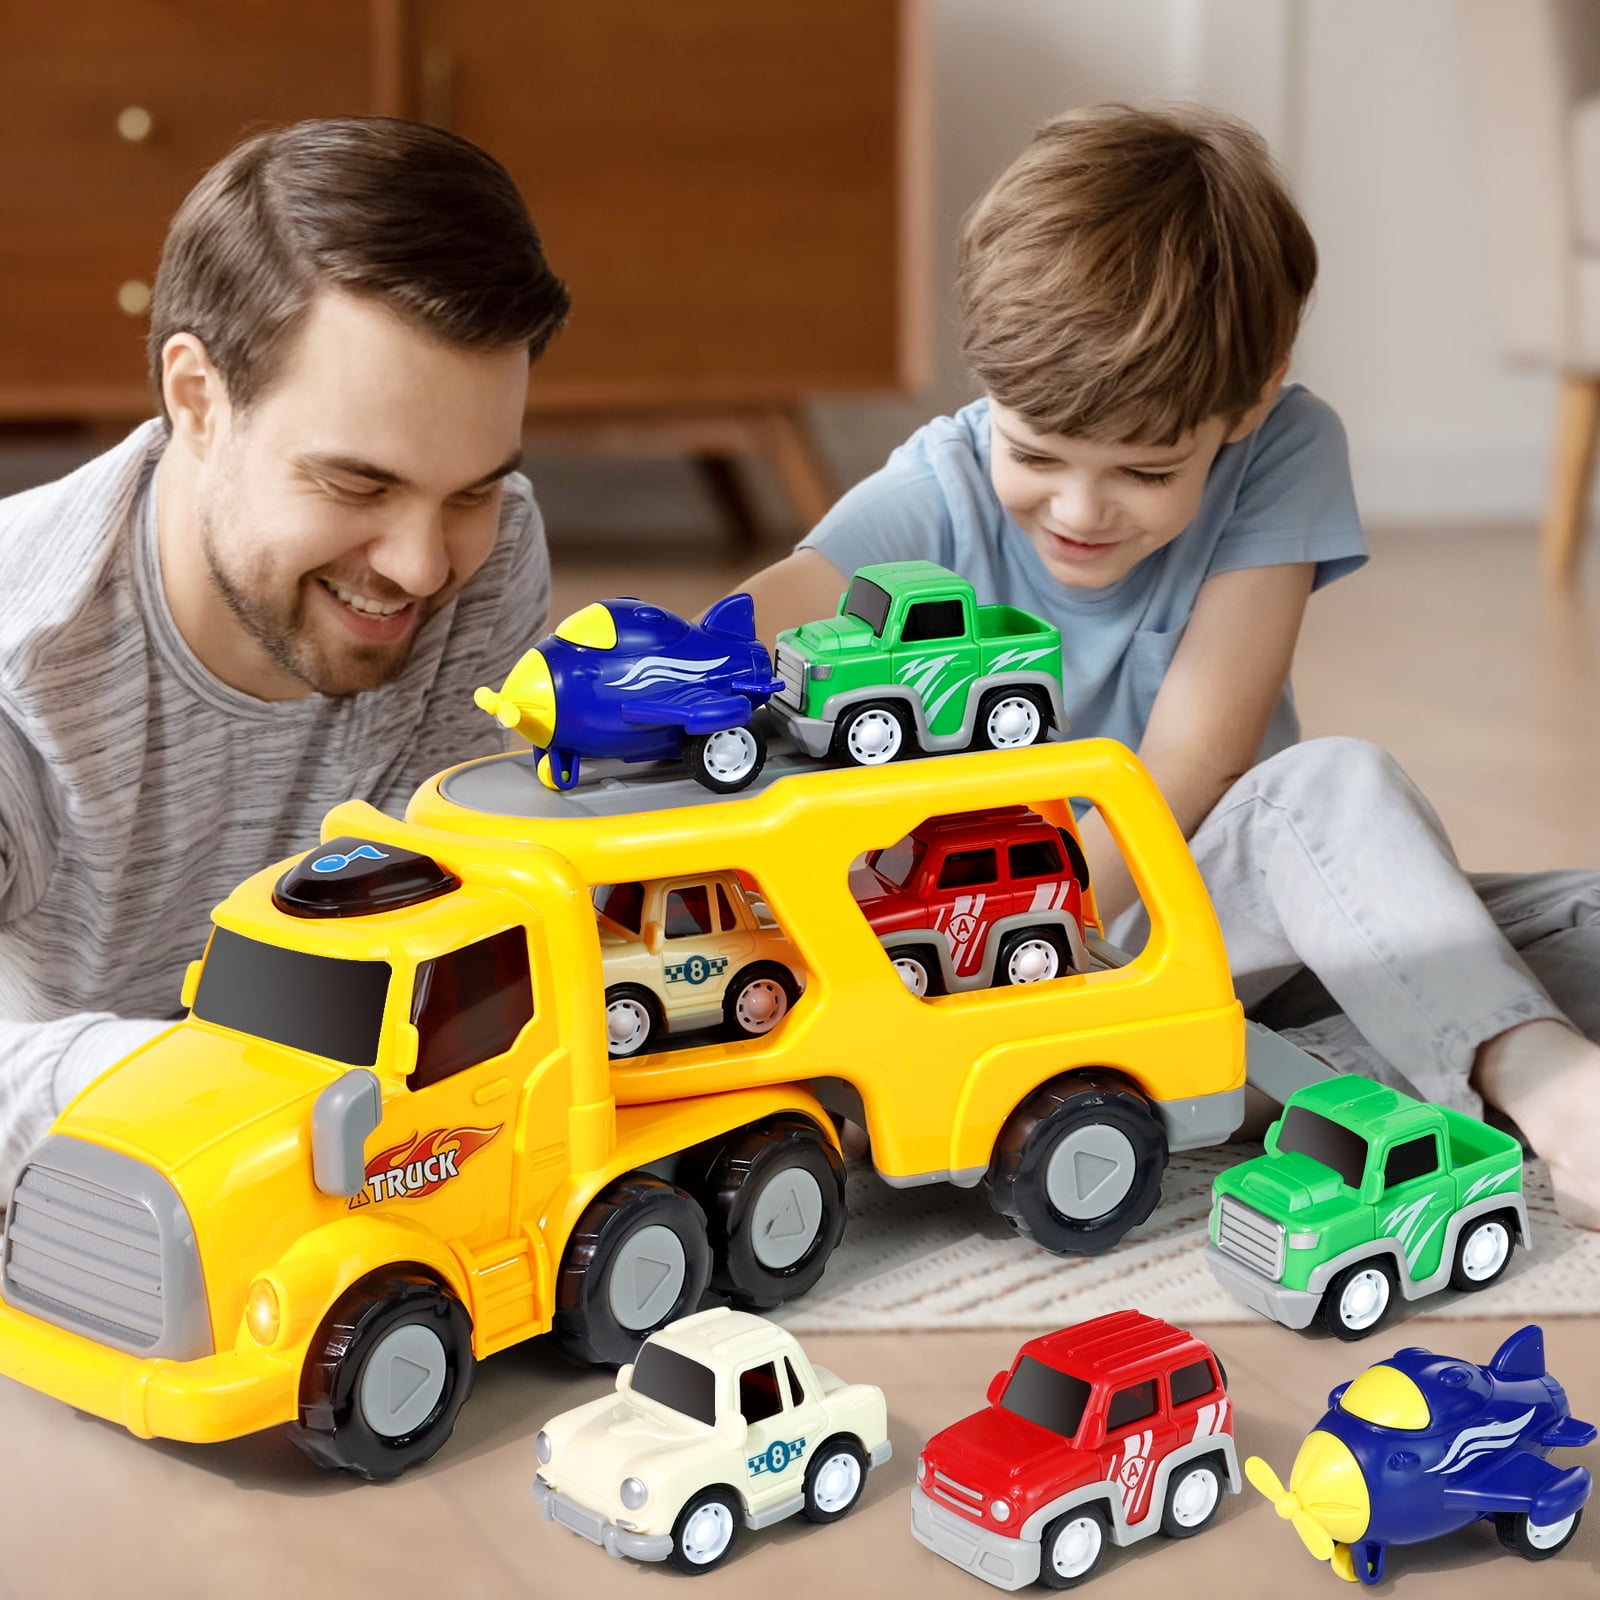 sethland Trucks Toys for Boys, Carrier Truck Cars with 6 Small